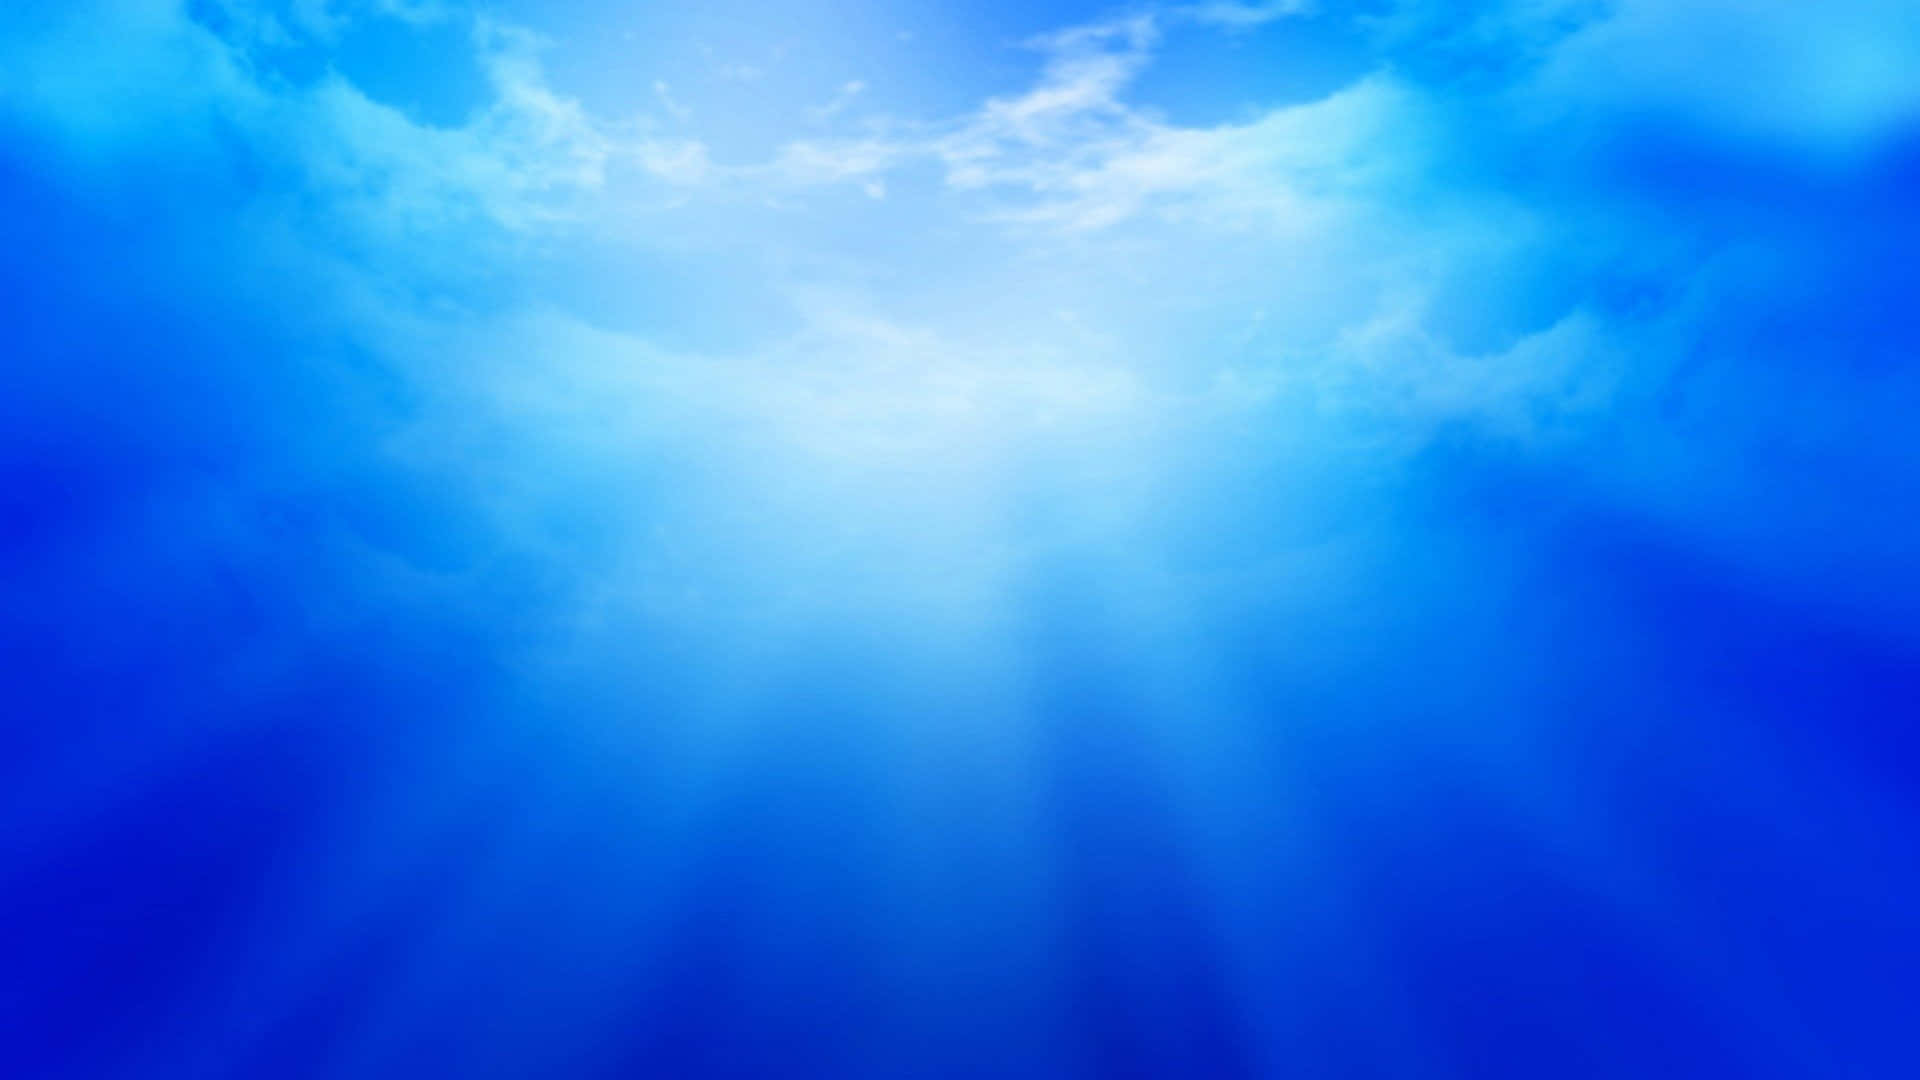 Enjoy blue hd's calming effects with this 1920 X 1080 Background.